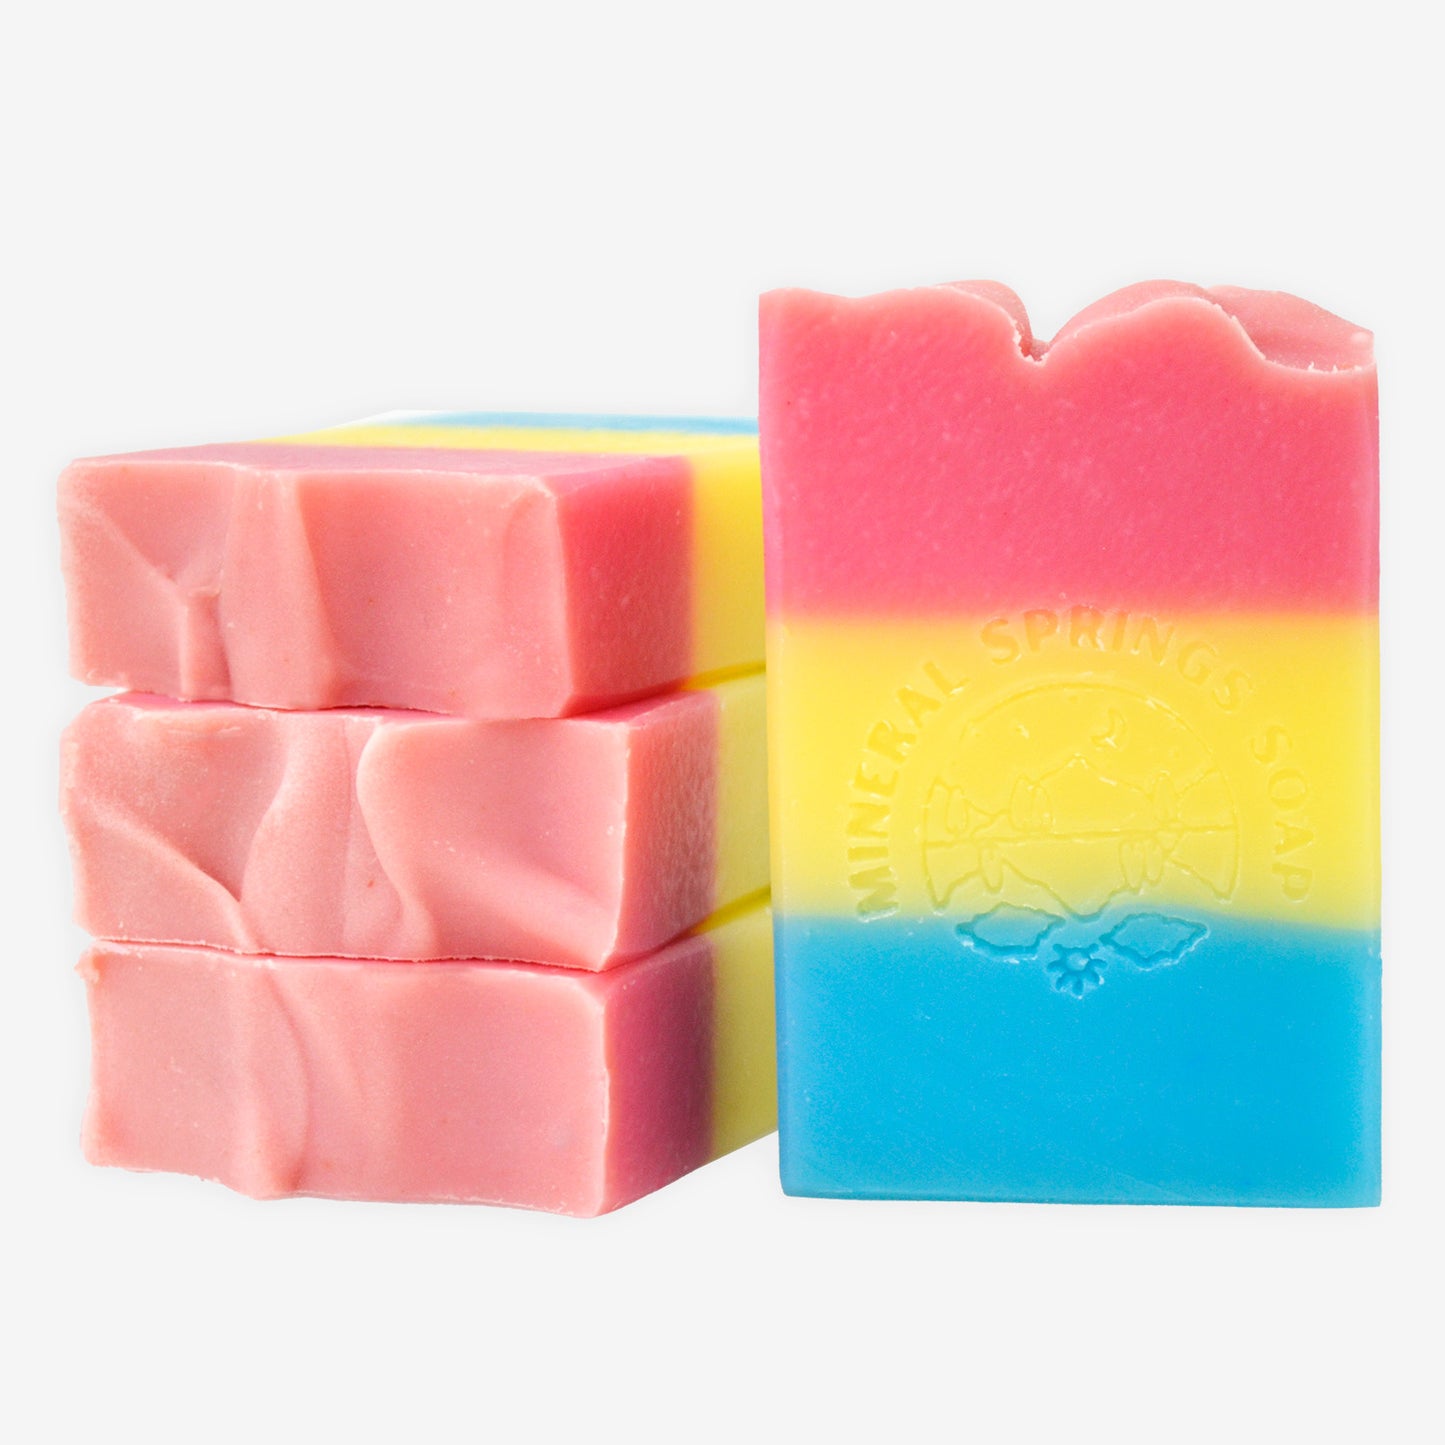 Pan Pride Strawberry Peach Handcrafted Soap